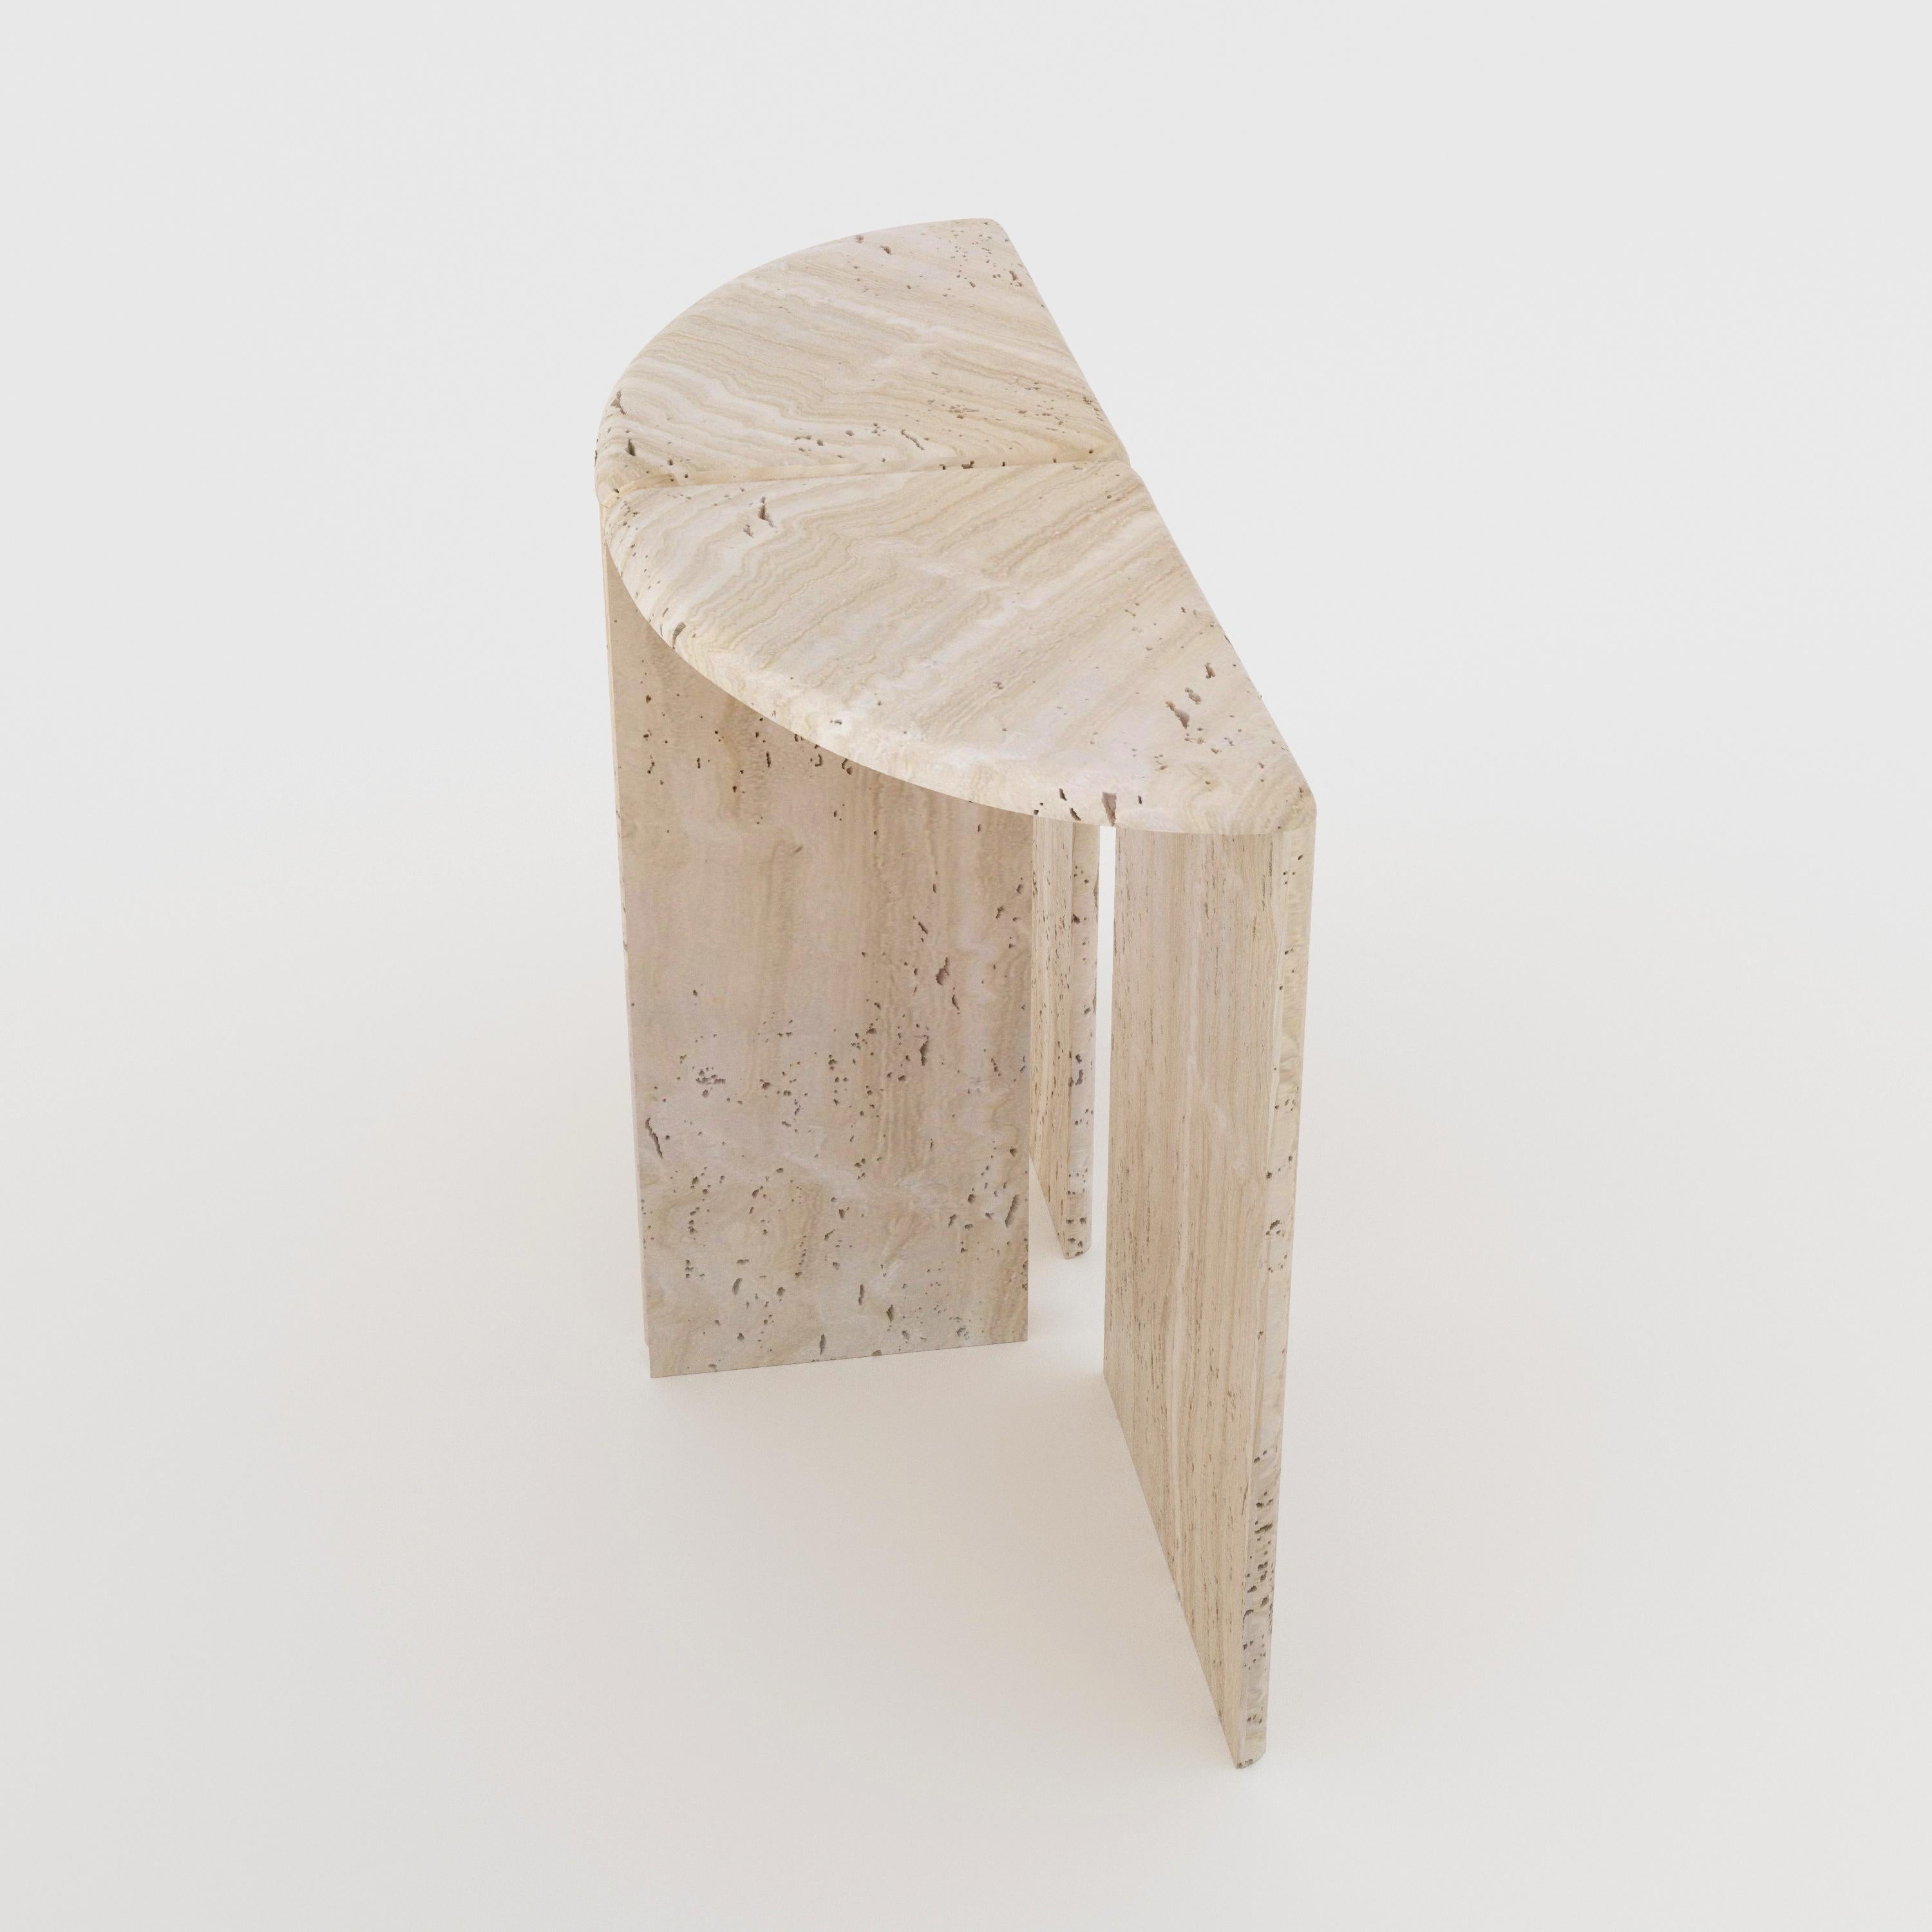 A console table handmade out of 30 mm thick honed unfilled Navona Travertine. Inspired by giant water lily pads and their curled rims, it's divided in 2 halves, with each part's rounded edges juxtaposed to the adjacent parts' edges. Available in any